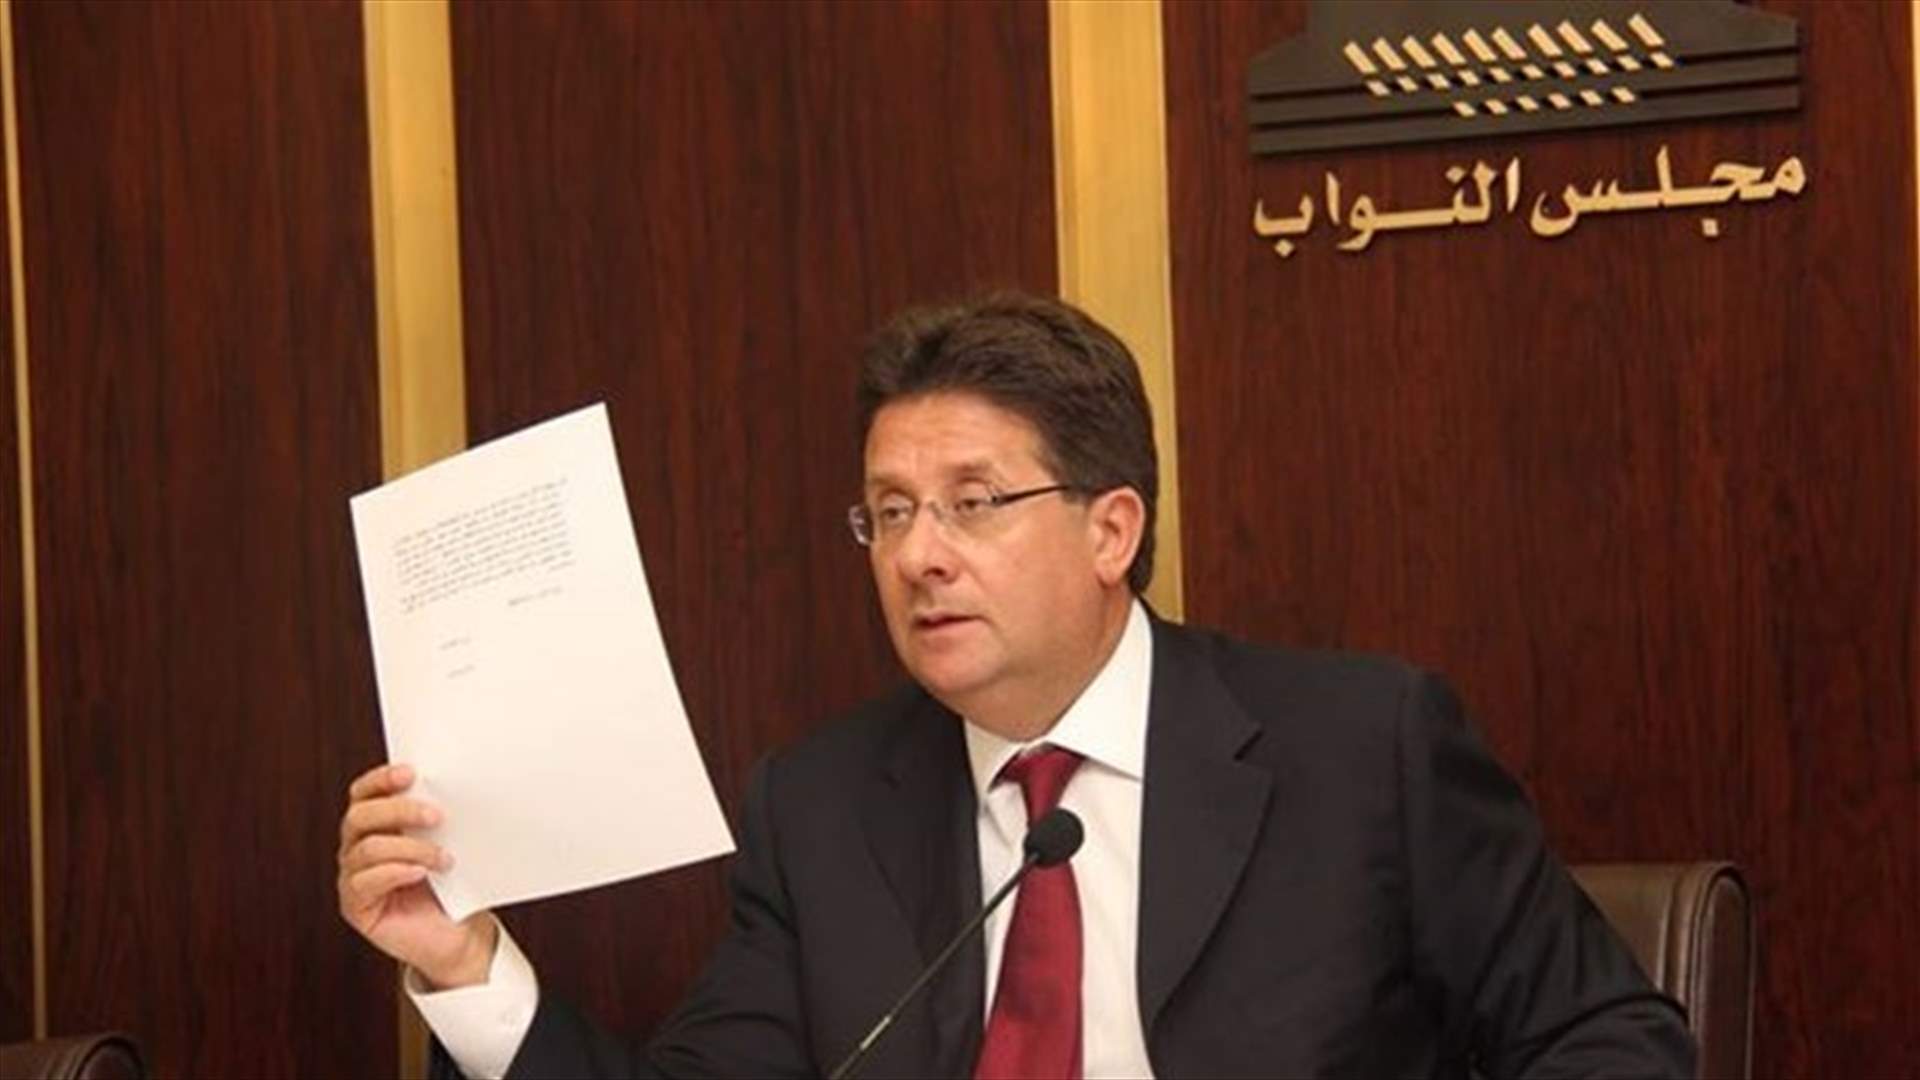 MP Kanaan called for reinstating item pertaining to issue of contract workers